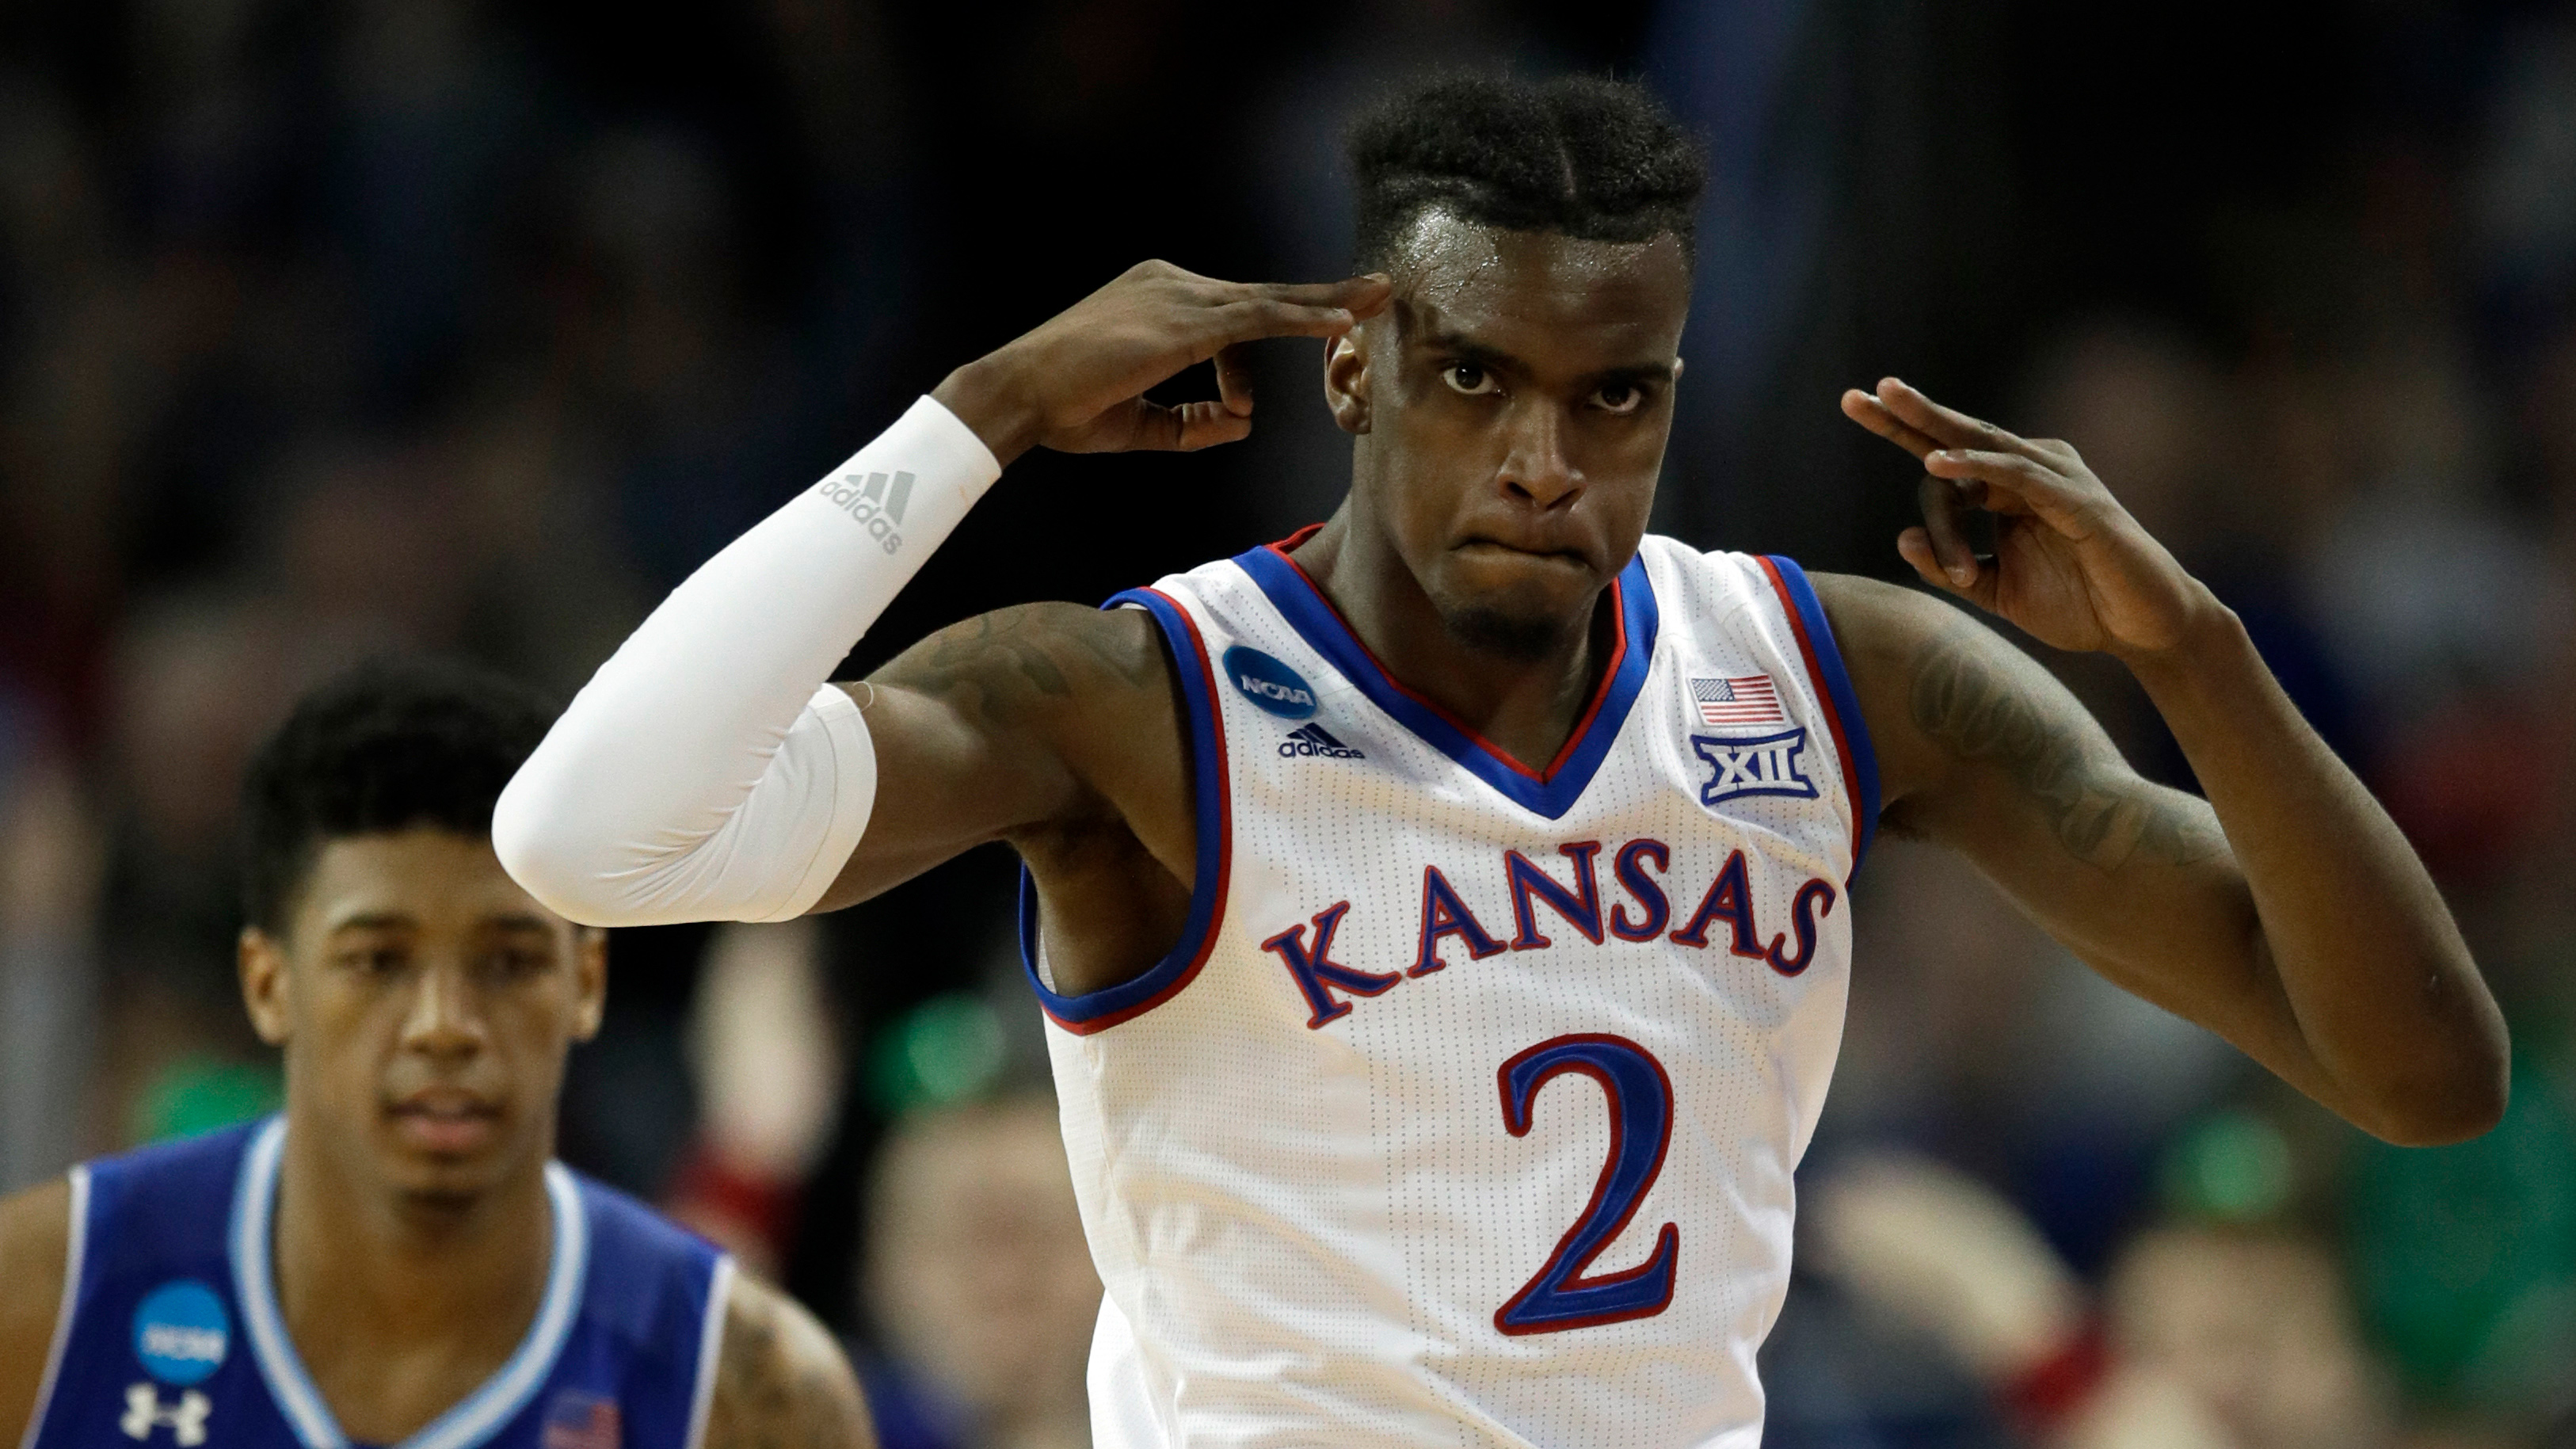 Kansas headed to Sweet 16 after slipping past Seton Hall 83-79